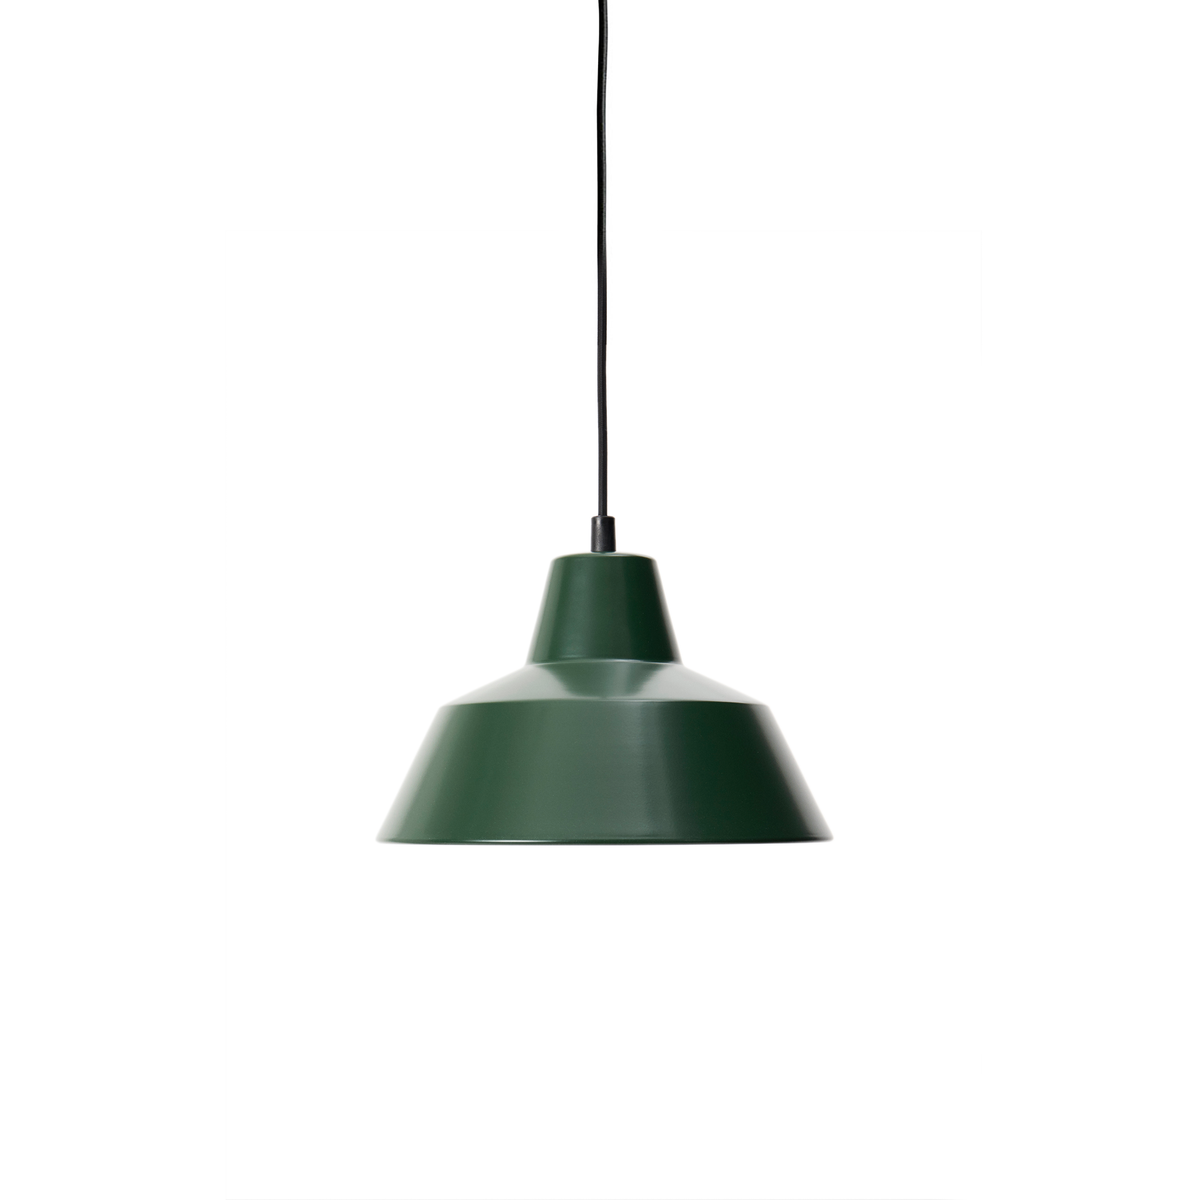 Made by Hand, Workshop Pendant W2, Racing Green